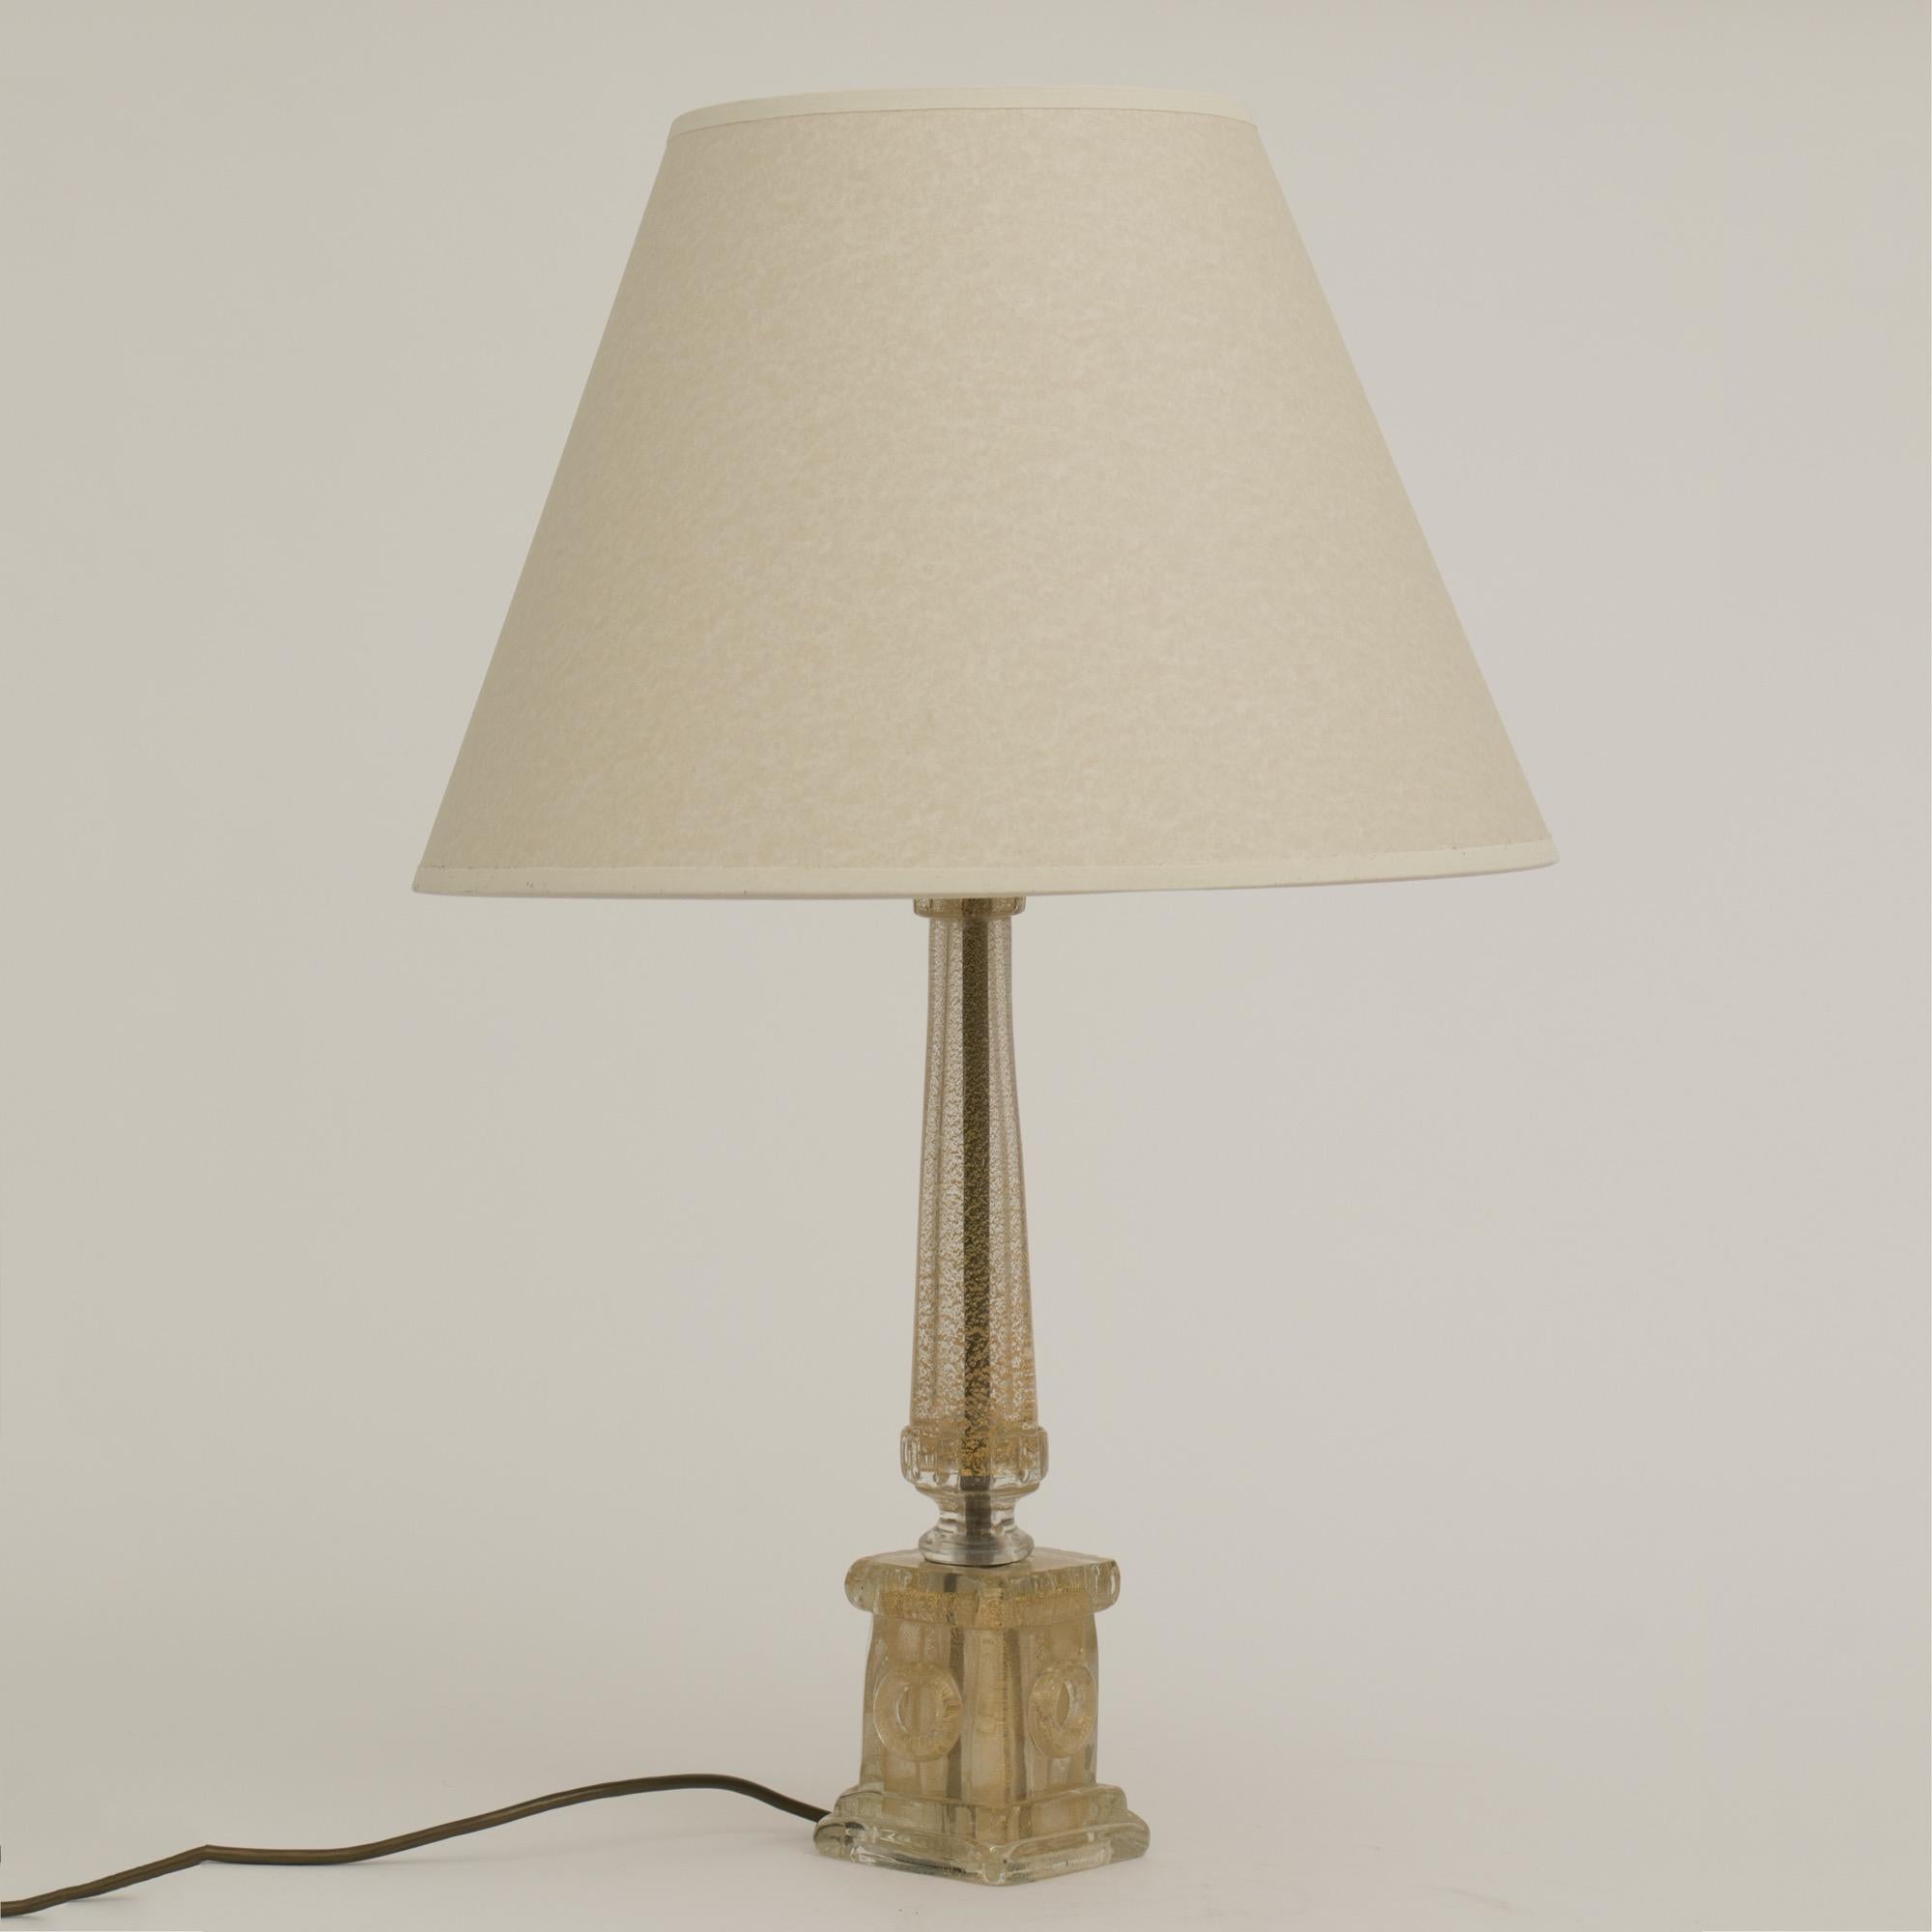 Midcentury Murano table lamp with gold inclusion.
Designed by Barovier & Toso
New replacement shade
Measures: H 63.5cm W 40cm D 40cm
Italy, circa 1960.